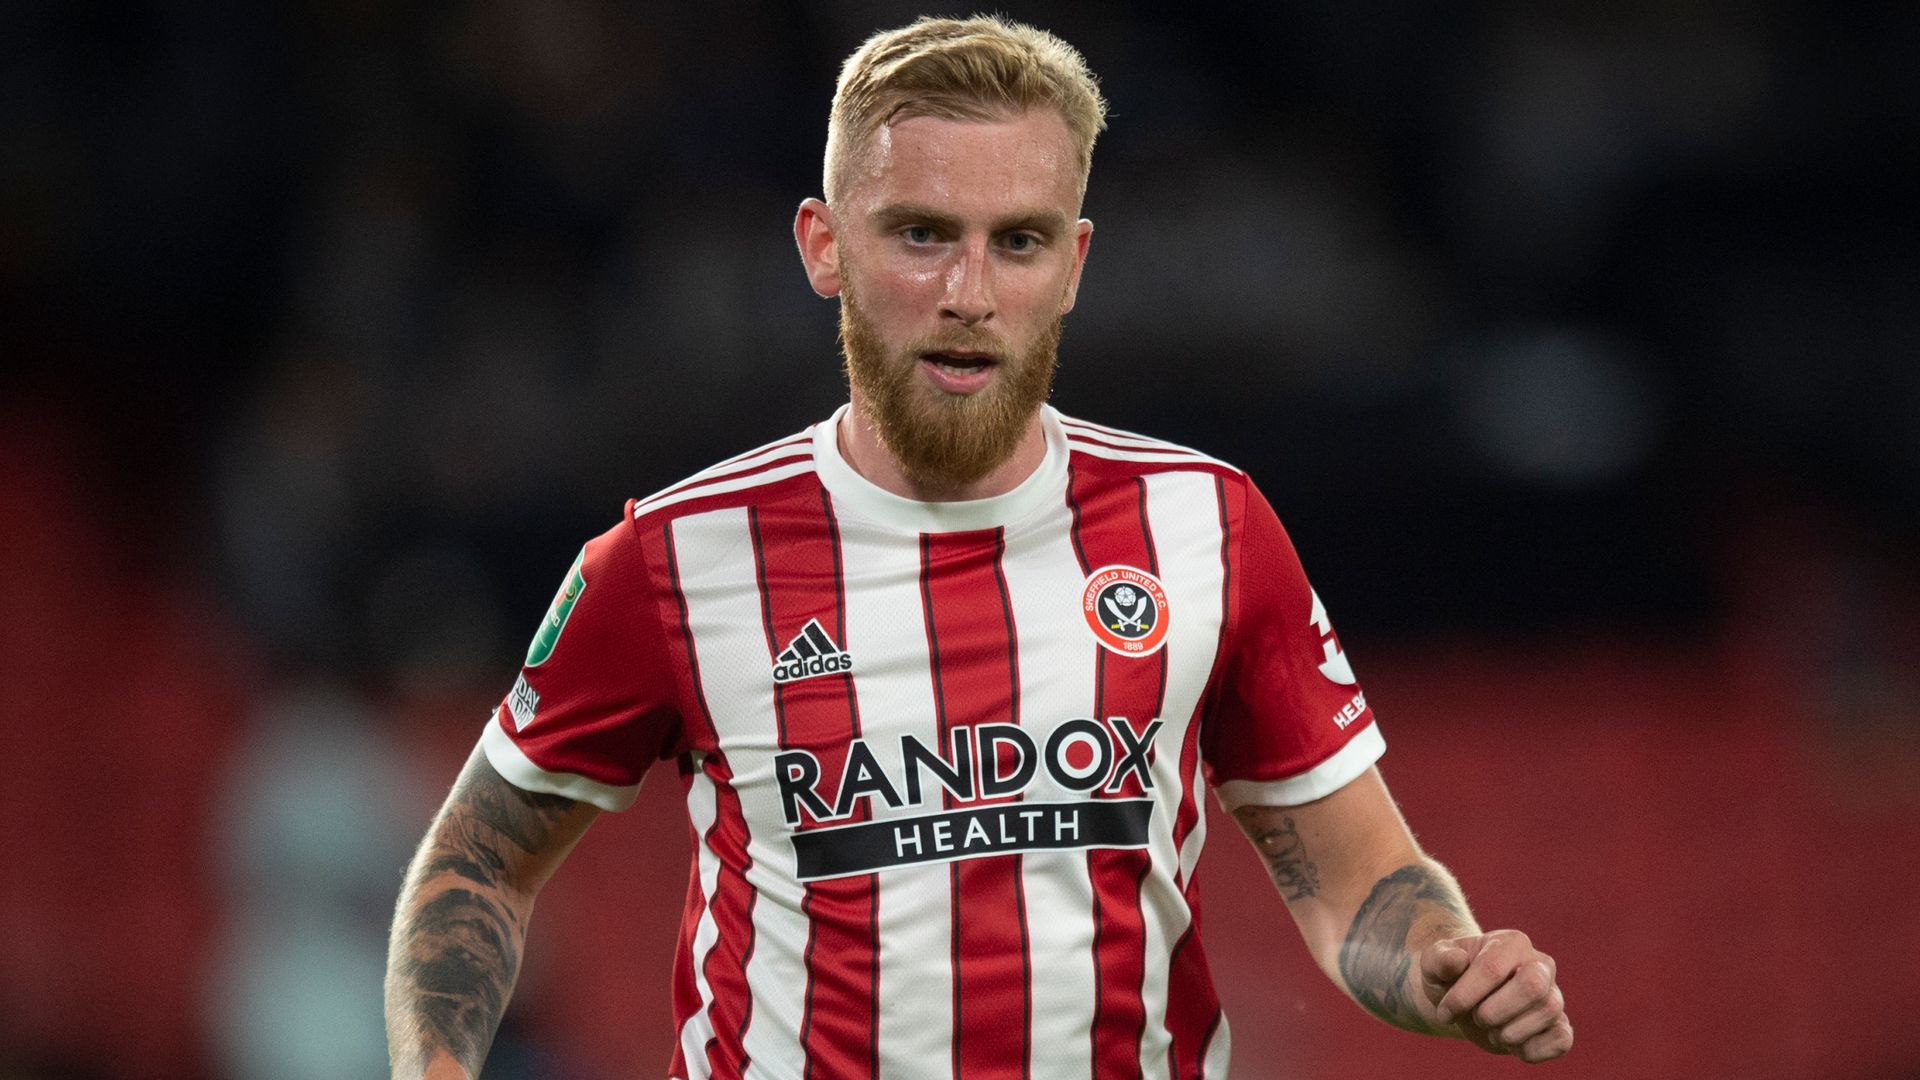 Sheff Utd's McBurnie accused of 'stamping' on fan during pitch invasion